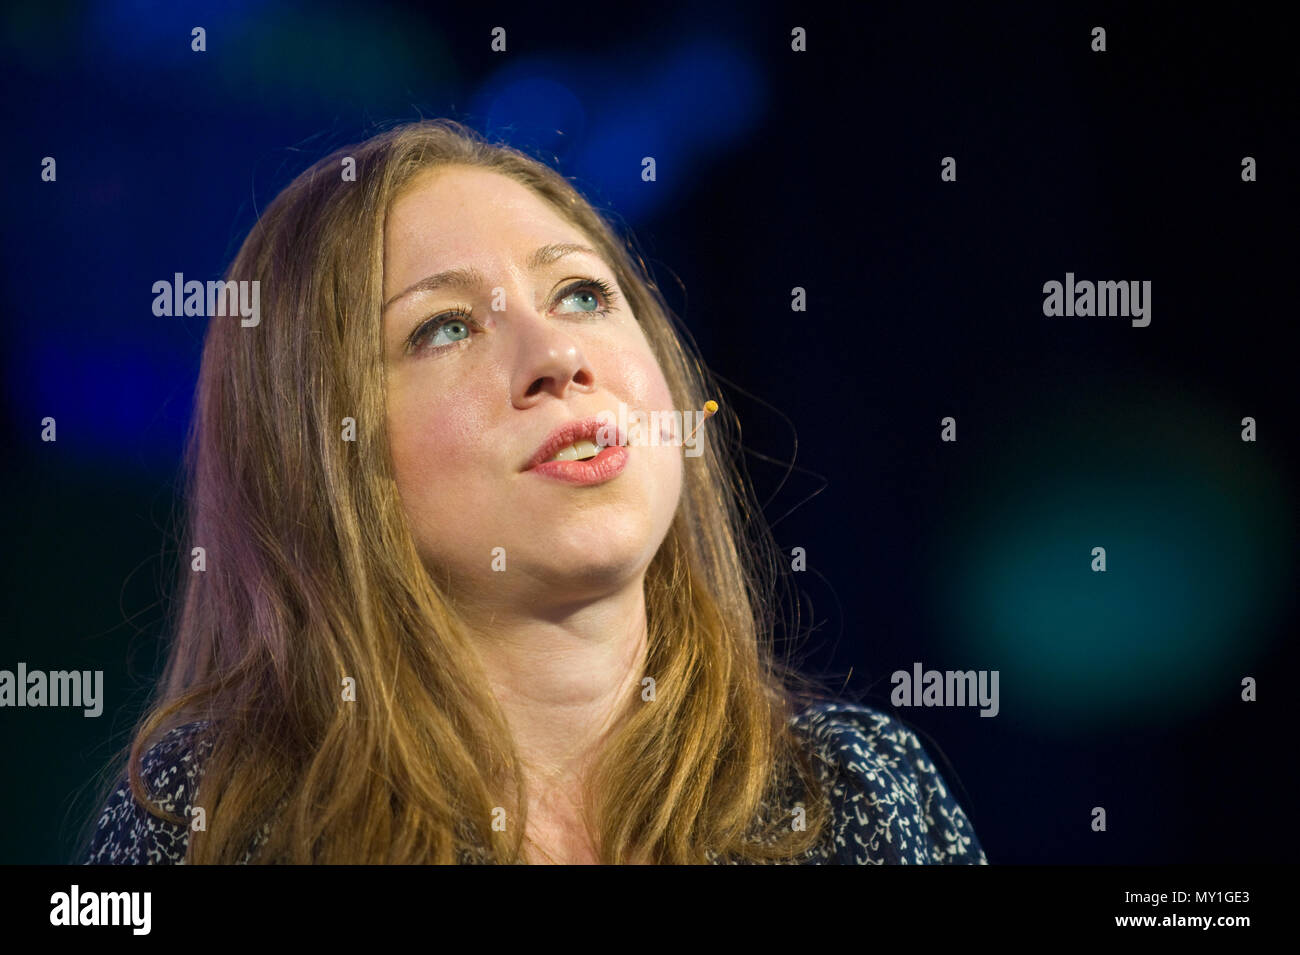 Chelsea Clinton campaigner & author speaking on stage at Hay Festival 2018 Hay-on-Wye Powys Wales UK Stock Photo